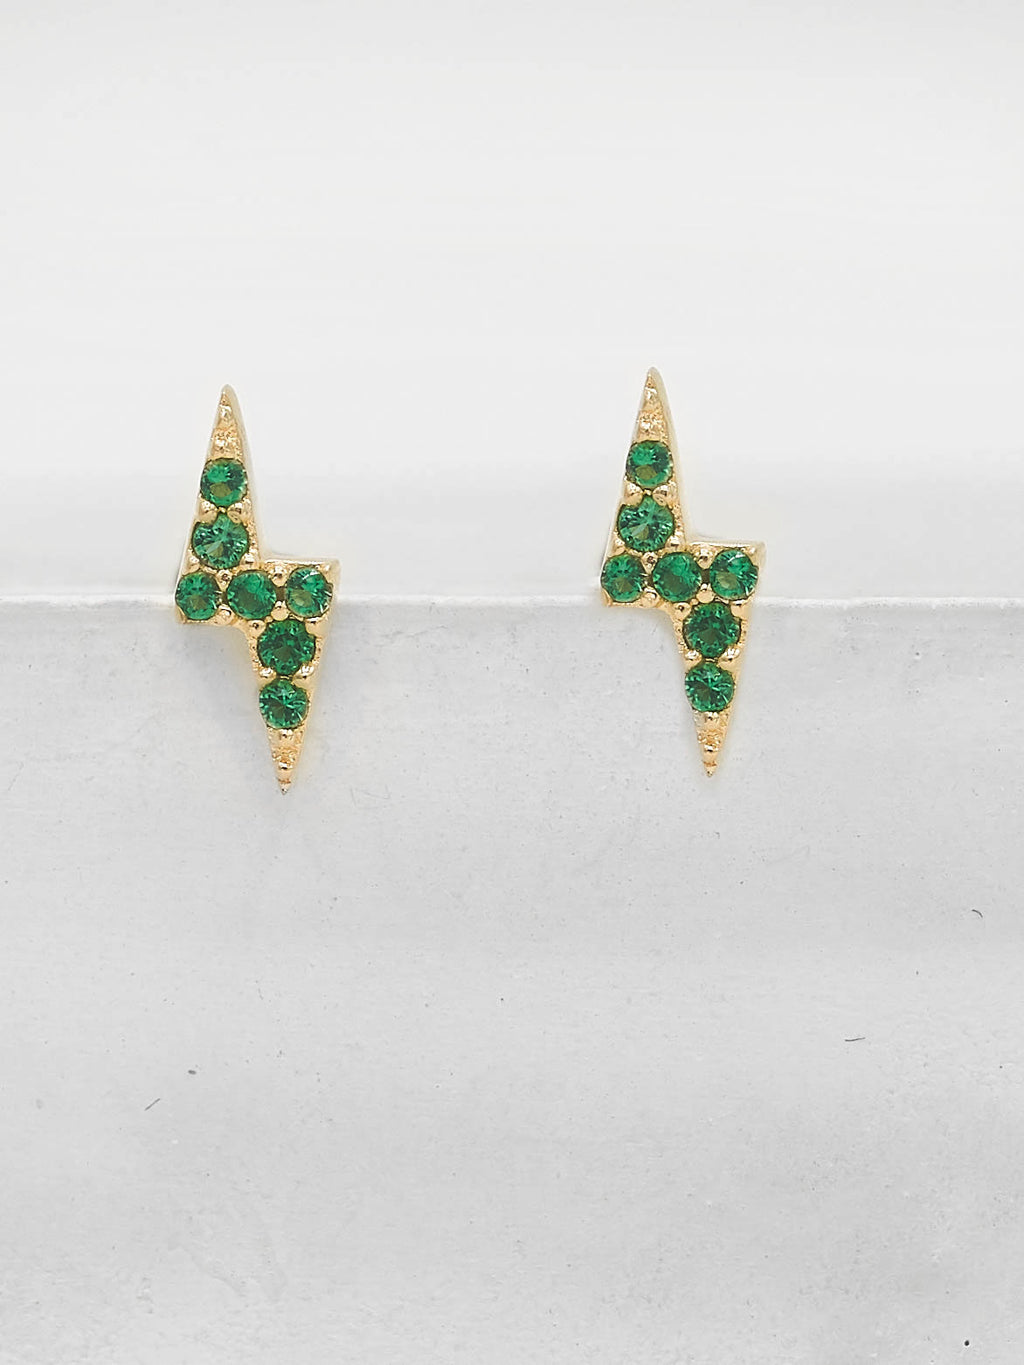 Tiny Lightning Bolt design with Green Emerald Round CZ Cubic Zirconia Stud Earrings by The Faint Hearted Jewelry